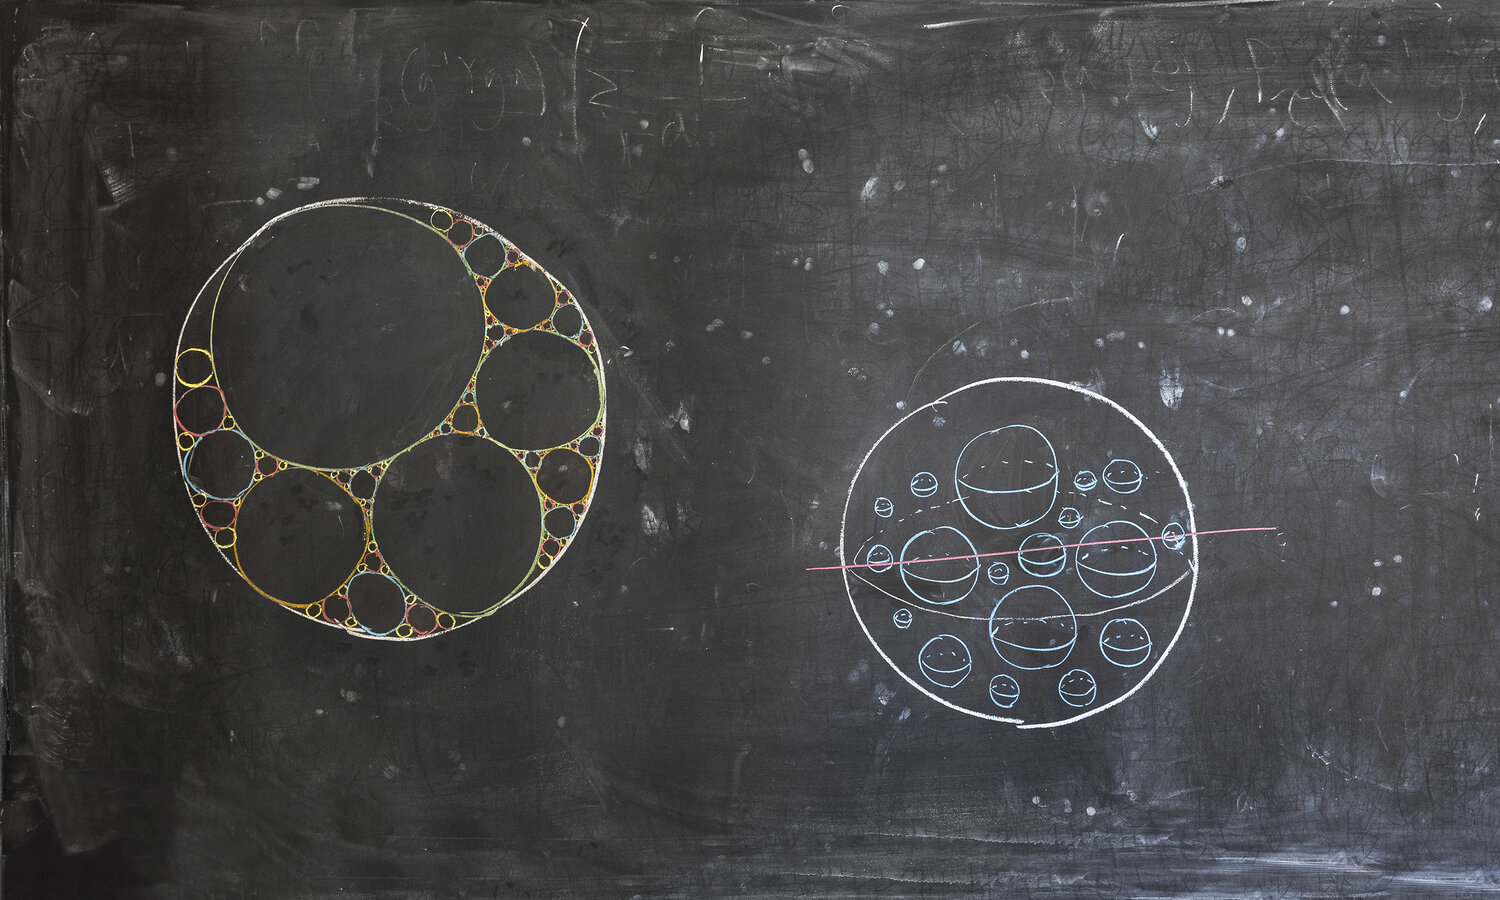 Mathematicians' chalk experiments captured as art in new book from  photographer Jessica Wynne